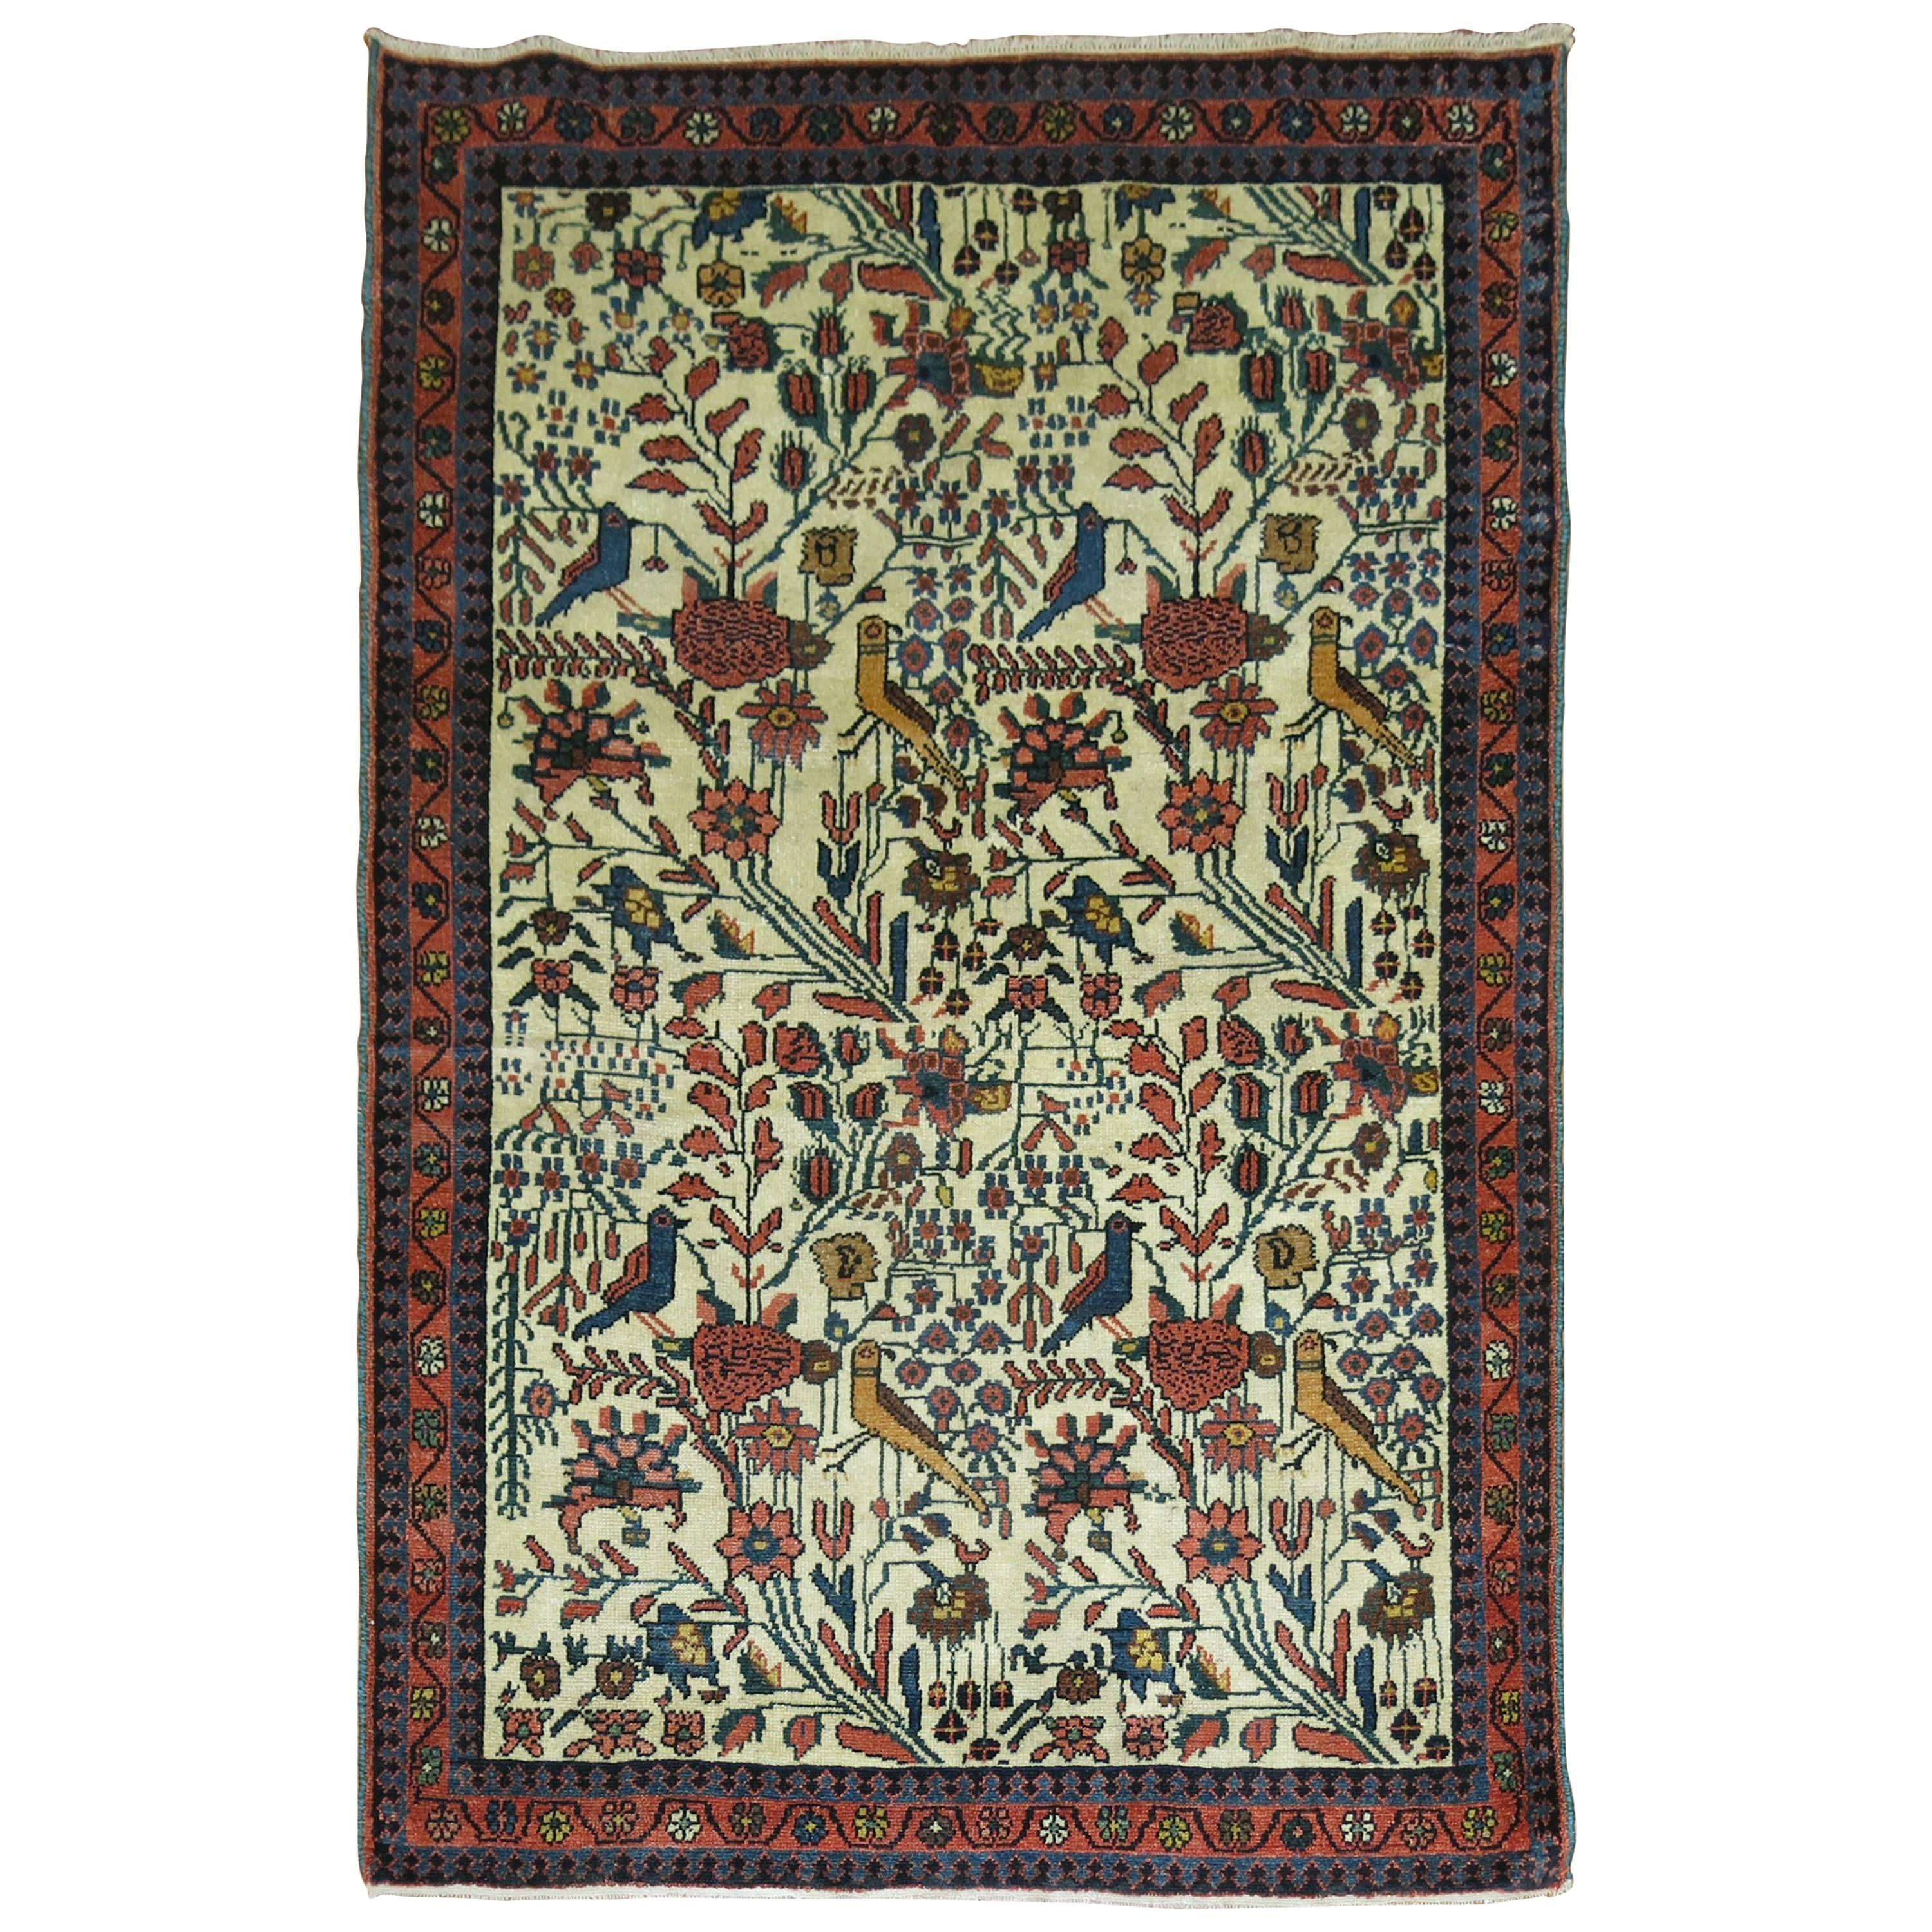 Ivory Field Pigeon Bird Traditional 20th century Persian Pictorial Rug